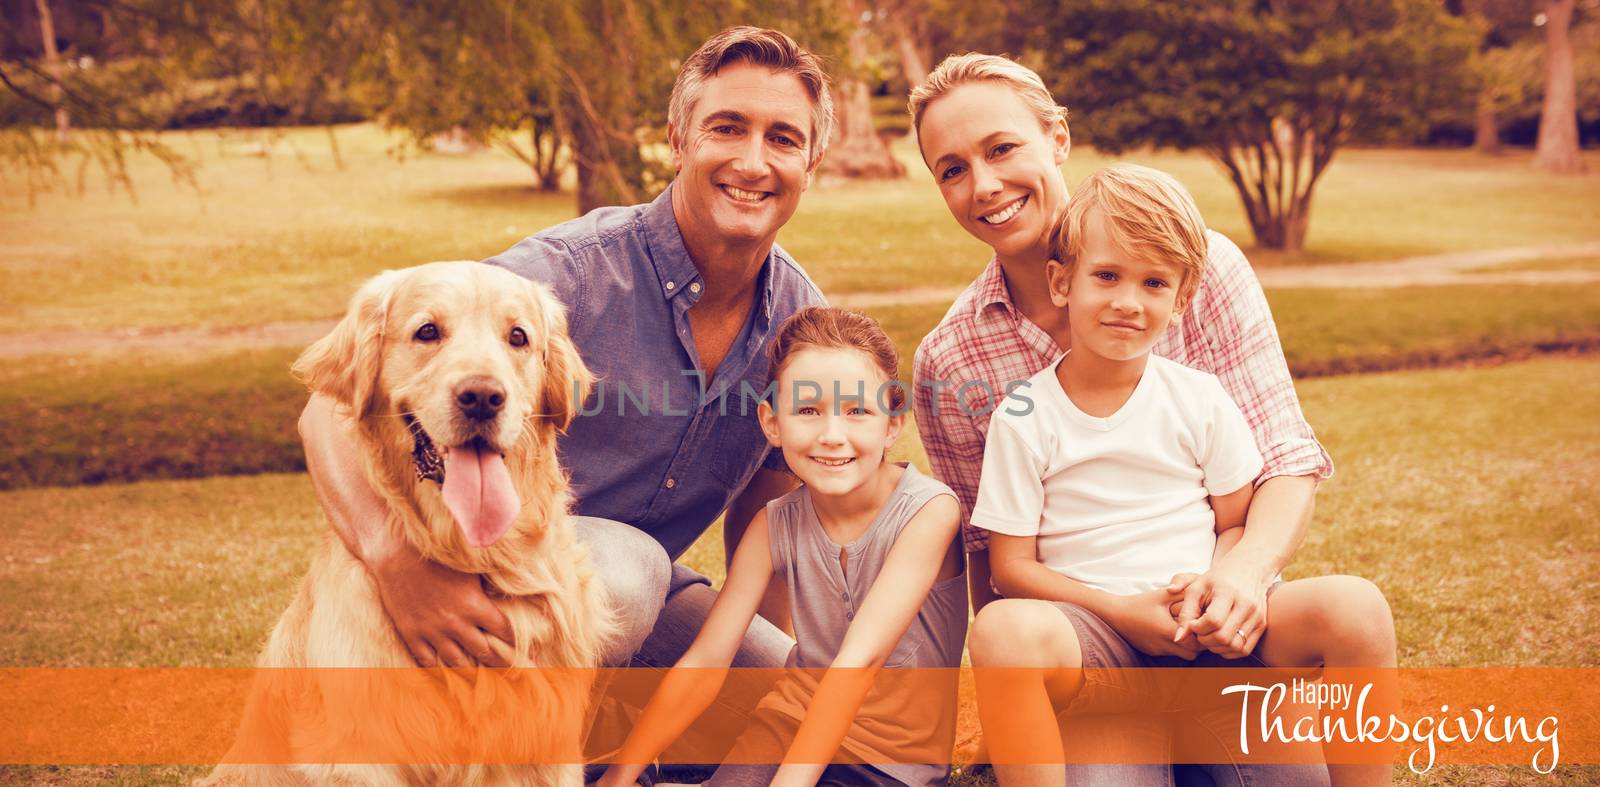 Illustration of happy thanksgiving day text greeting against portrait of family enjoying with dog at park